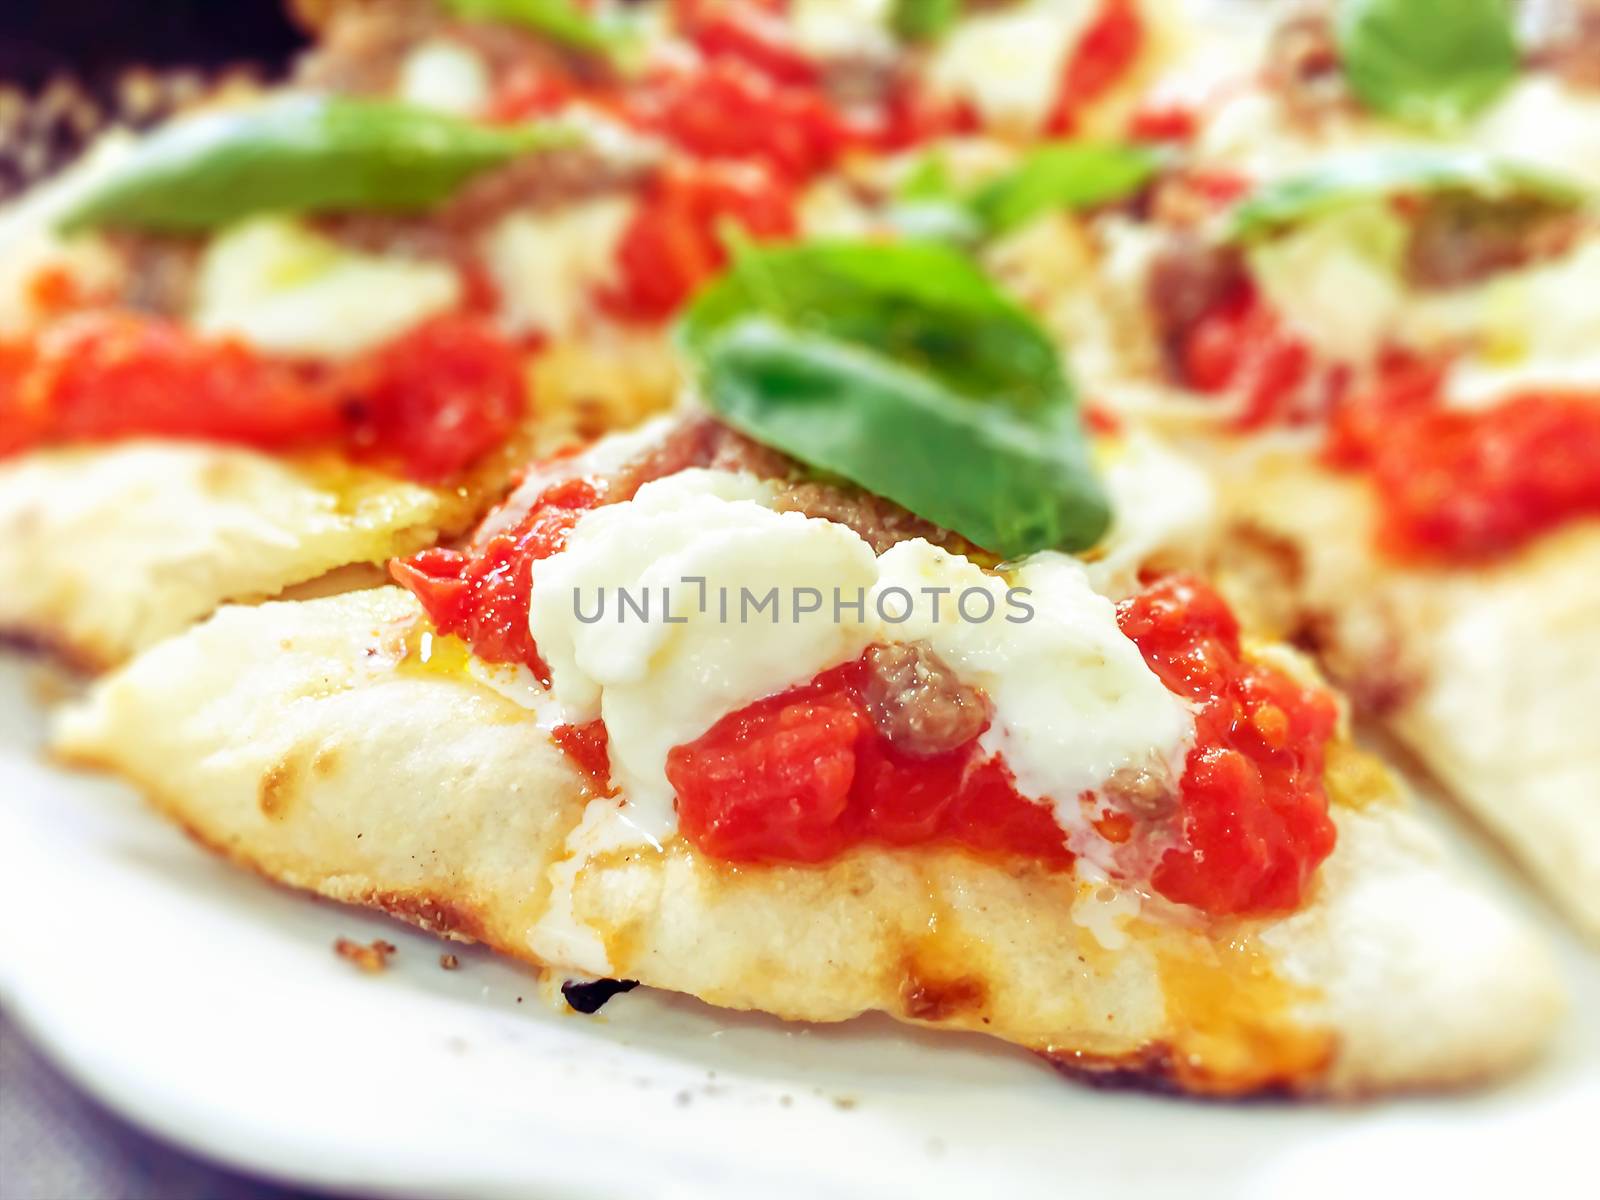 close-up view of a margherita pizza with fresh tomatoes, mozzarella cheese and basil leaves. Typical Neapolitan and Italian recipe